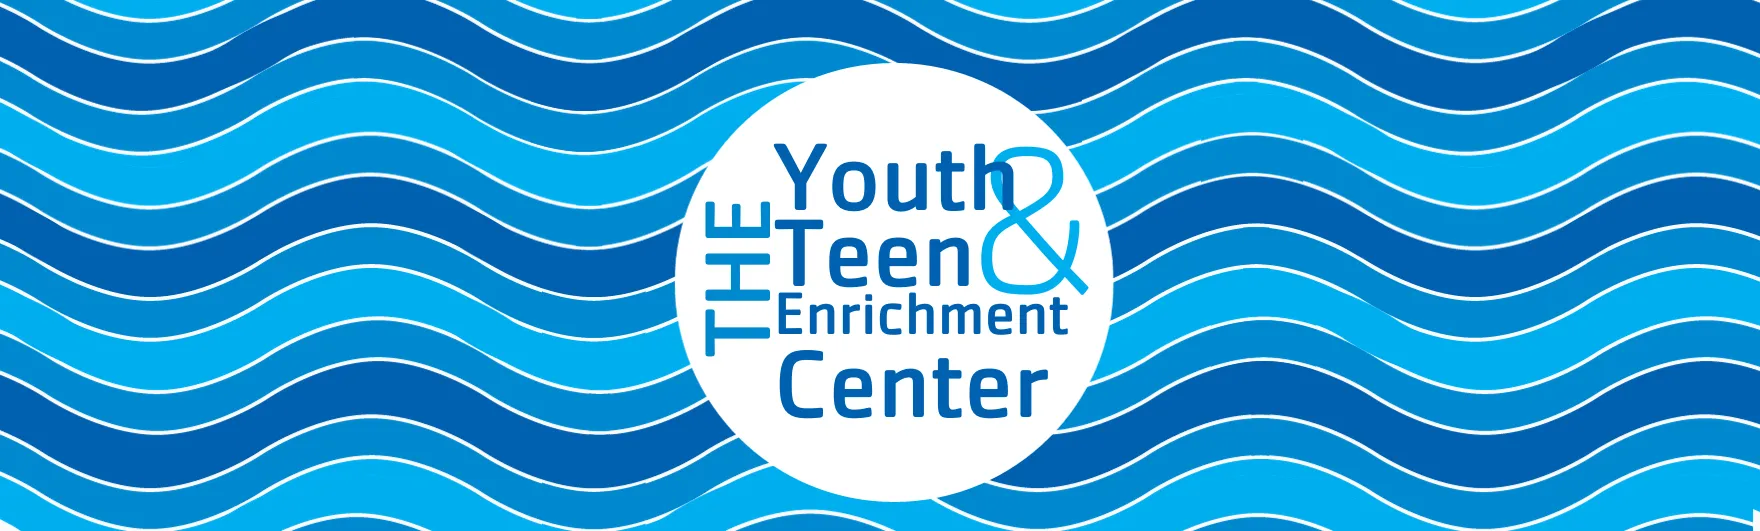 "the youth and teen enrichment center" overlayed on a multi-colored blue wave-like background